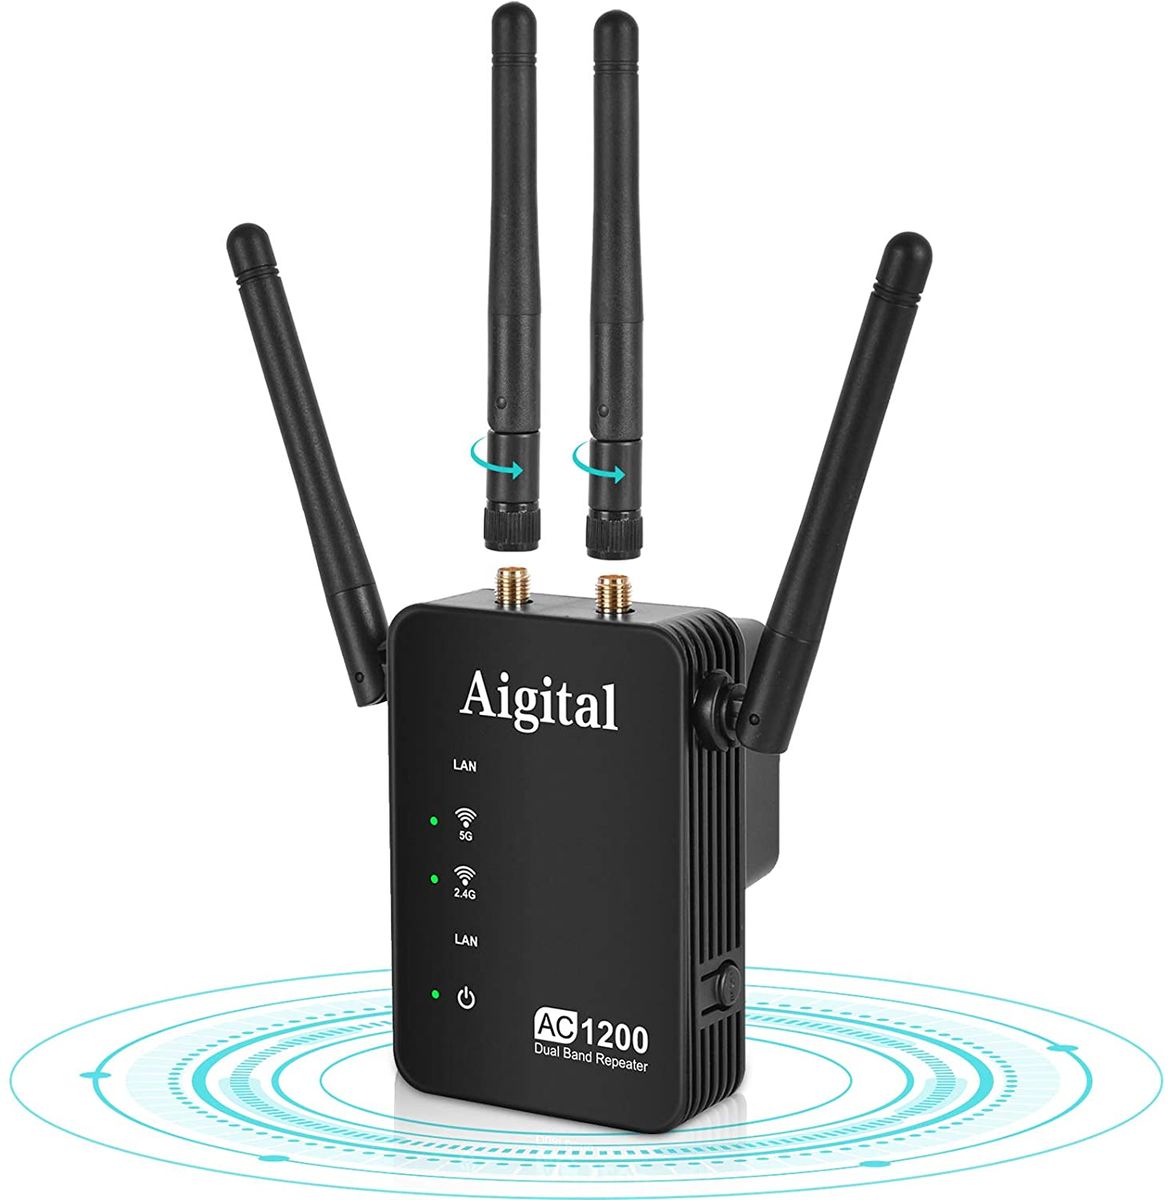 Aigital WLAN Repeater 1200 Mbit/s Super Boost WLAN Amplifier with LAN / Wan Connection and 4 Removable Antennas, Wireless Access Point Dual Band 867 Mbps 5 GHz & 300 Mbps 2.4 GHz